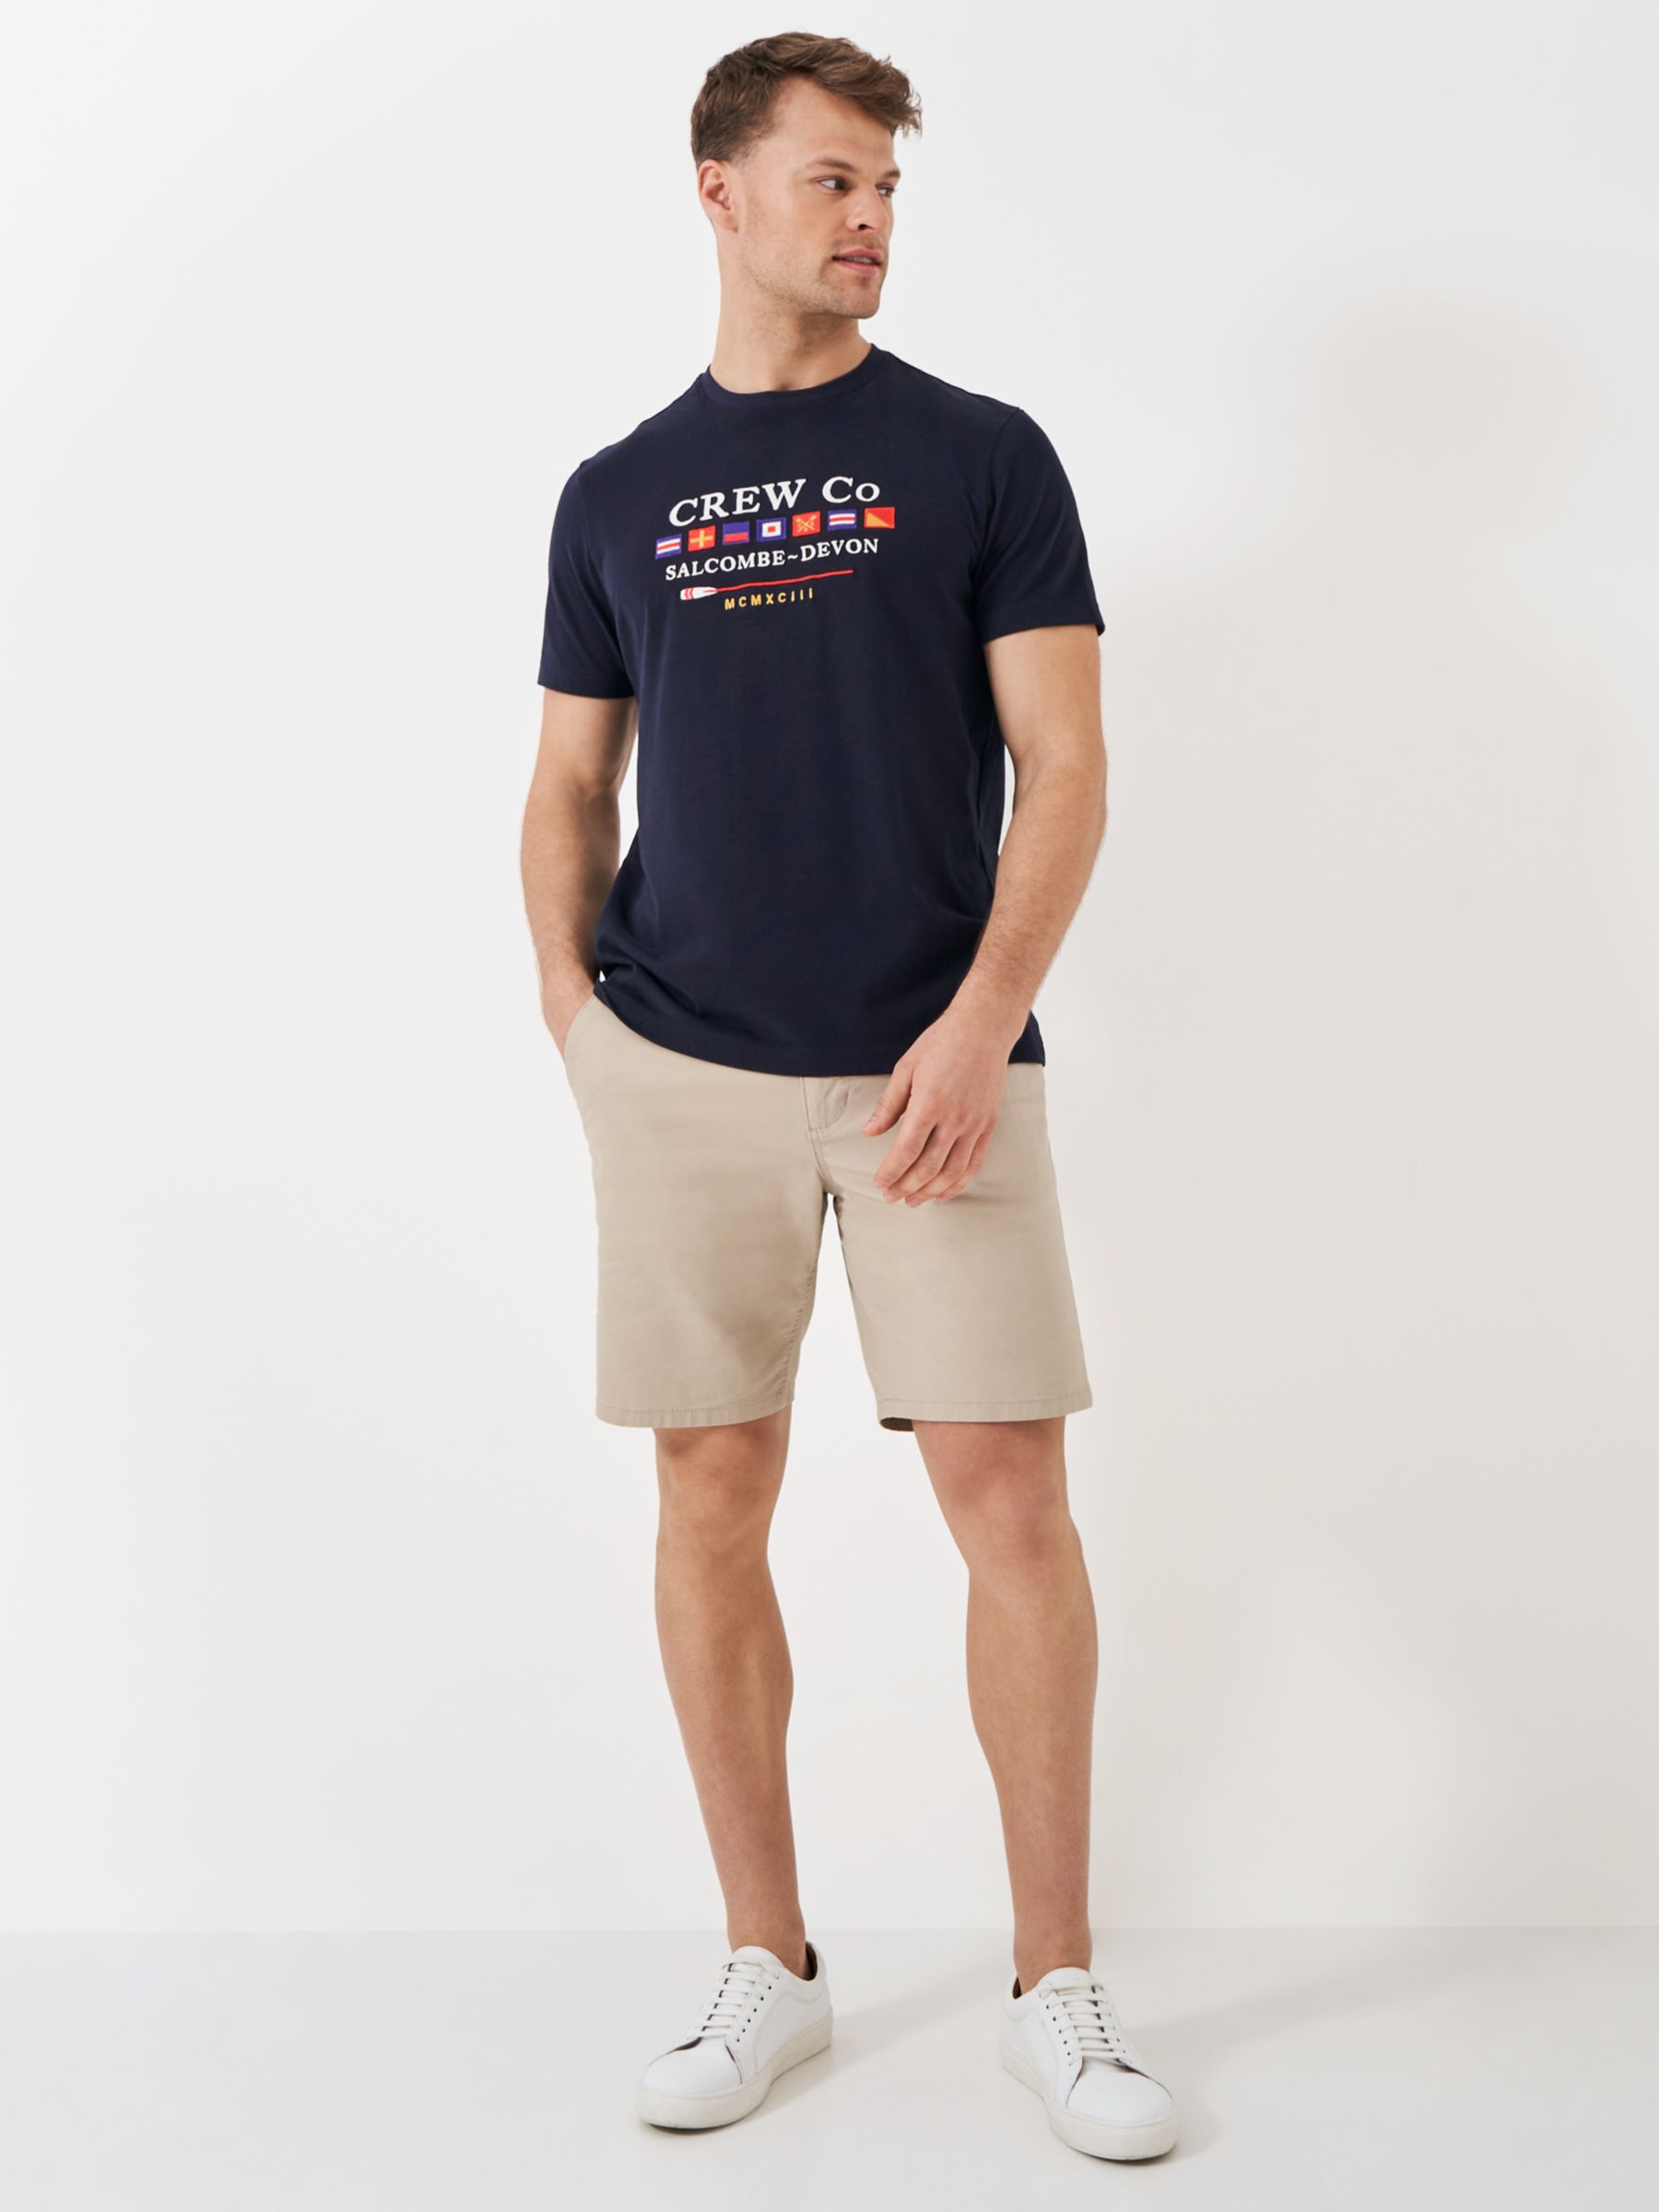 Buy Crew Clothing Embroidered Salcombe Graphic T-Shirt, Navy/Multi Online at johnlewis.com